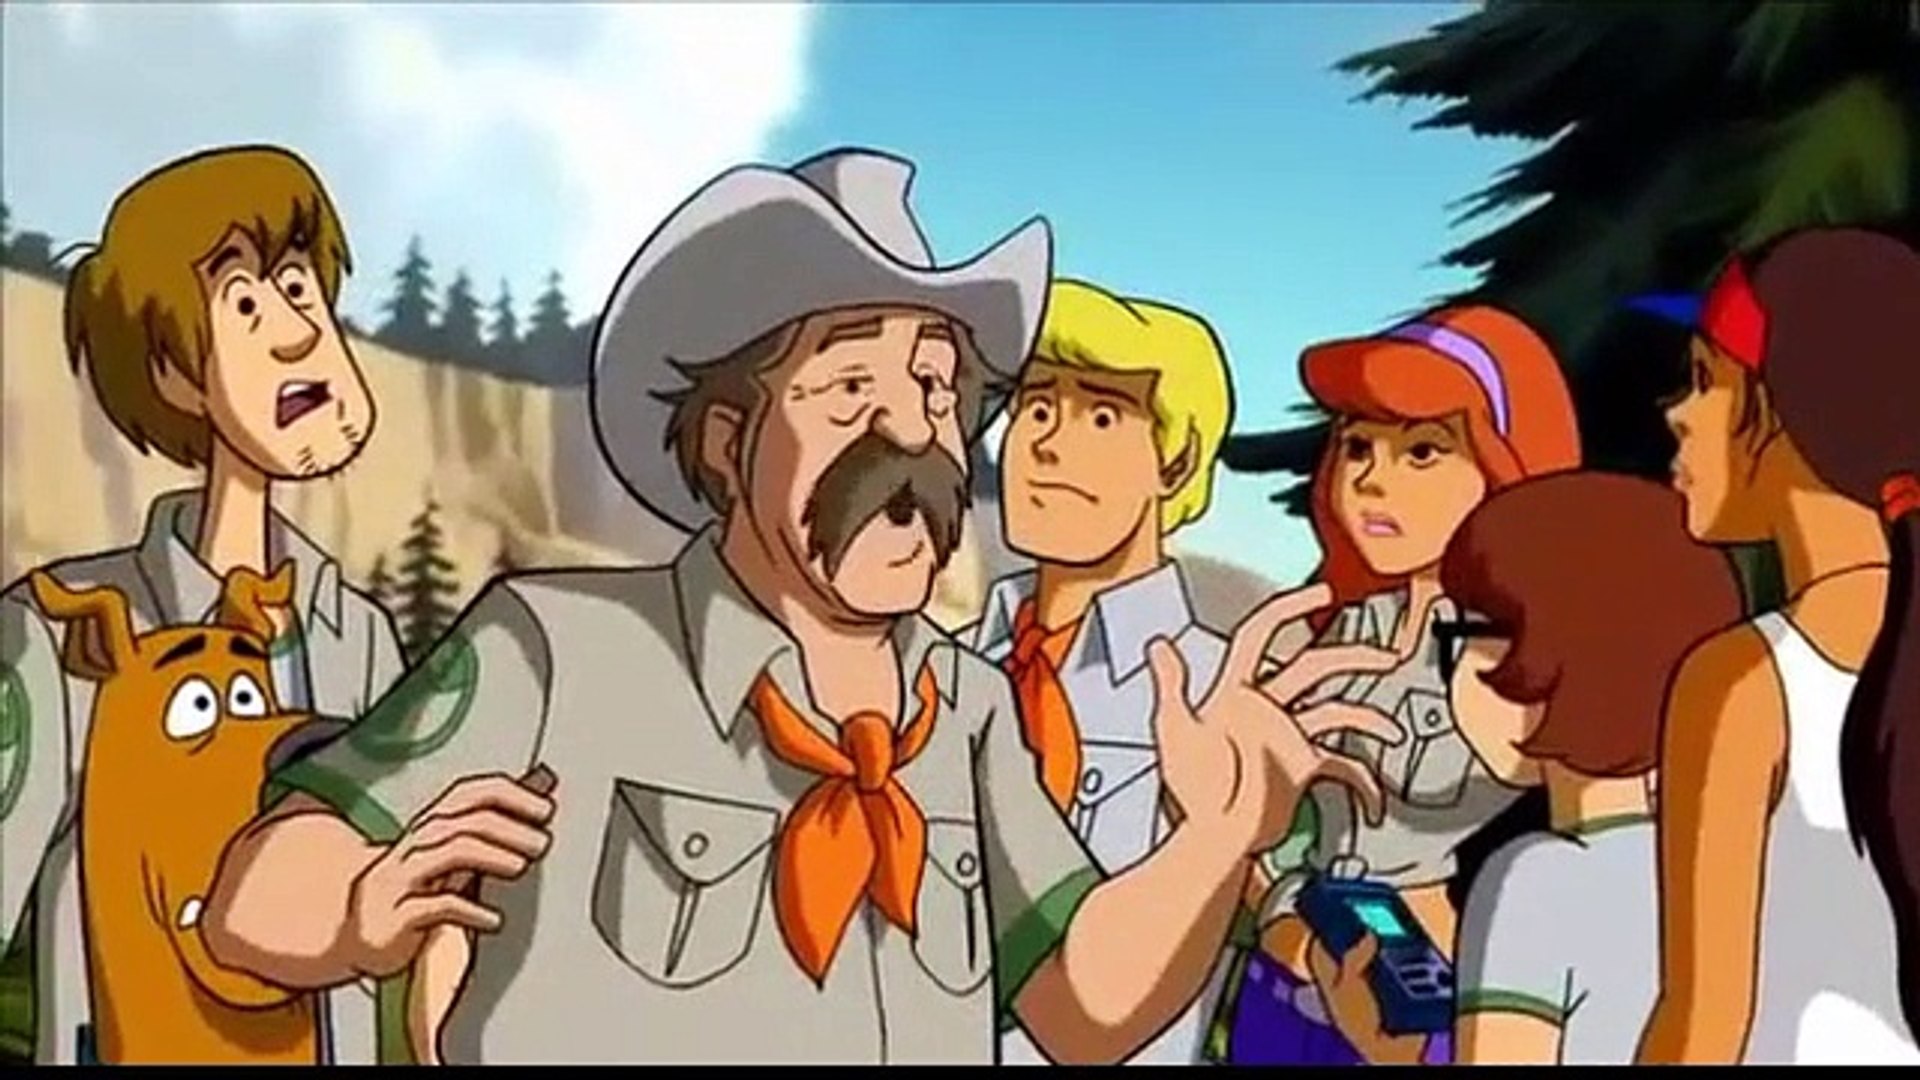 Camp Scare Movie - Part 2 - Watch Scooby-Doo - video Dailymotion.